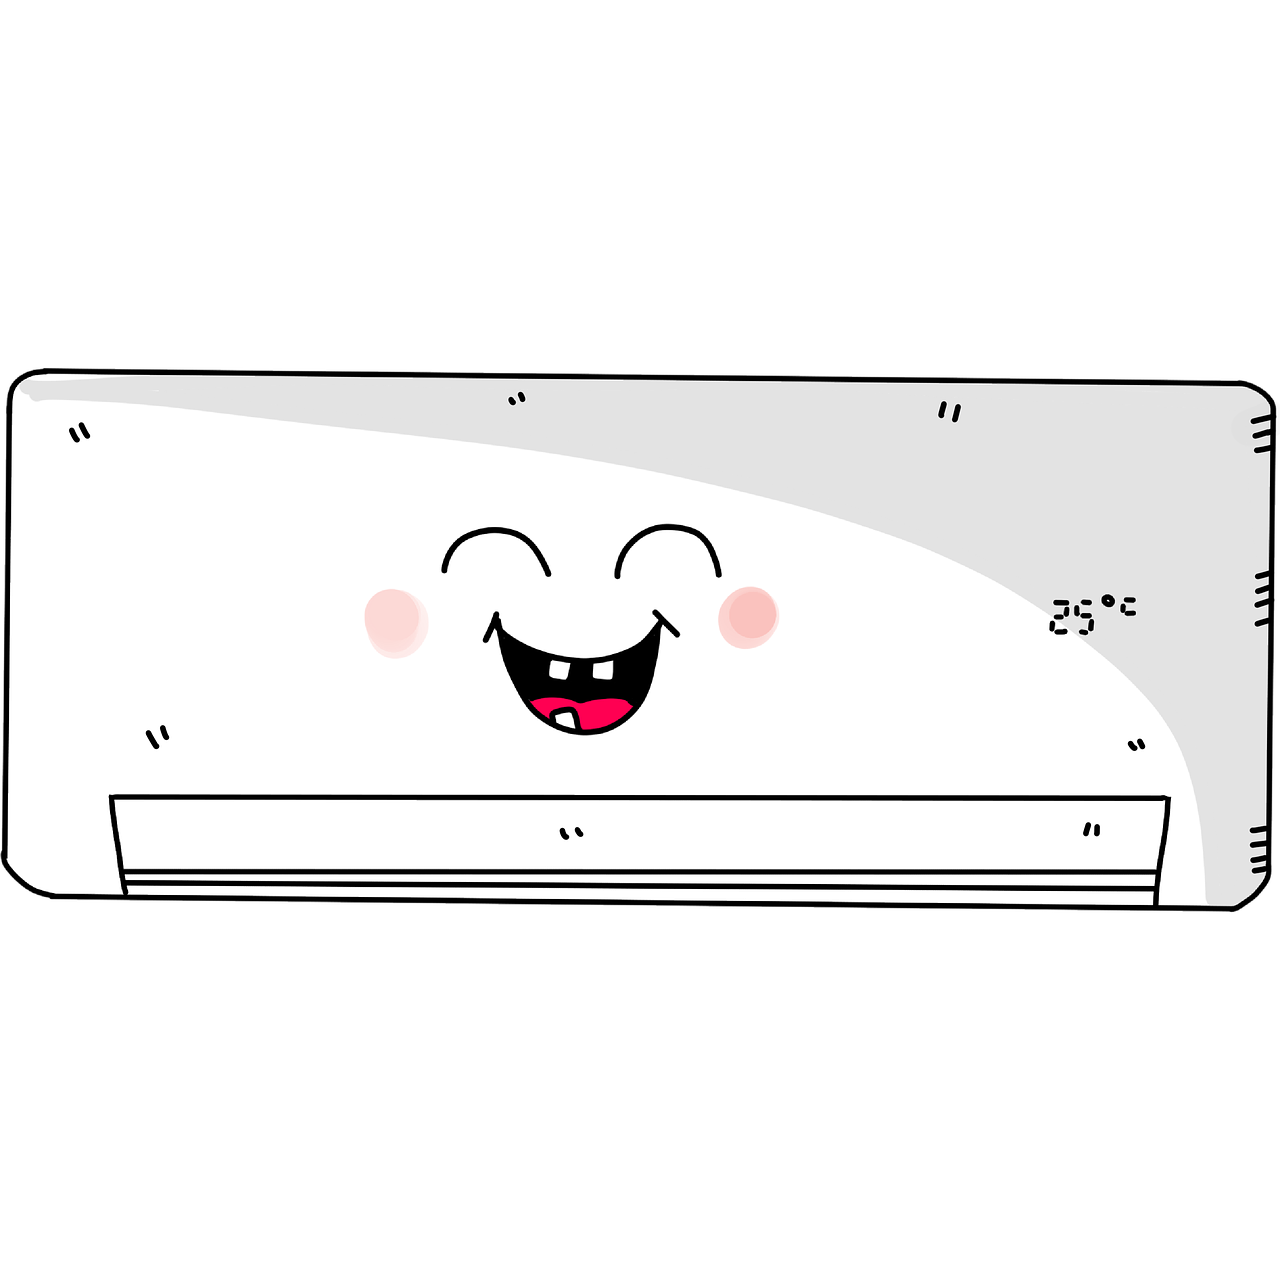 a cartoon air conditioner with a happy face, inspired by Ke Jiusi, 480p, whiteout eyes, 3 4 5 3 1, innocent mood